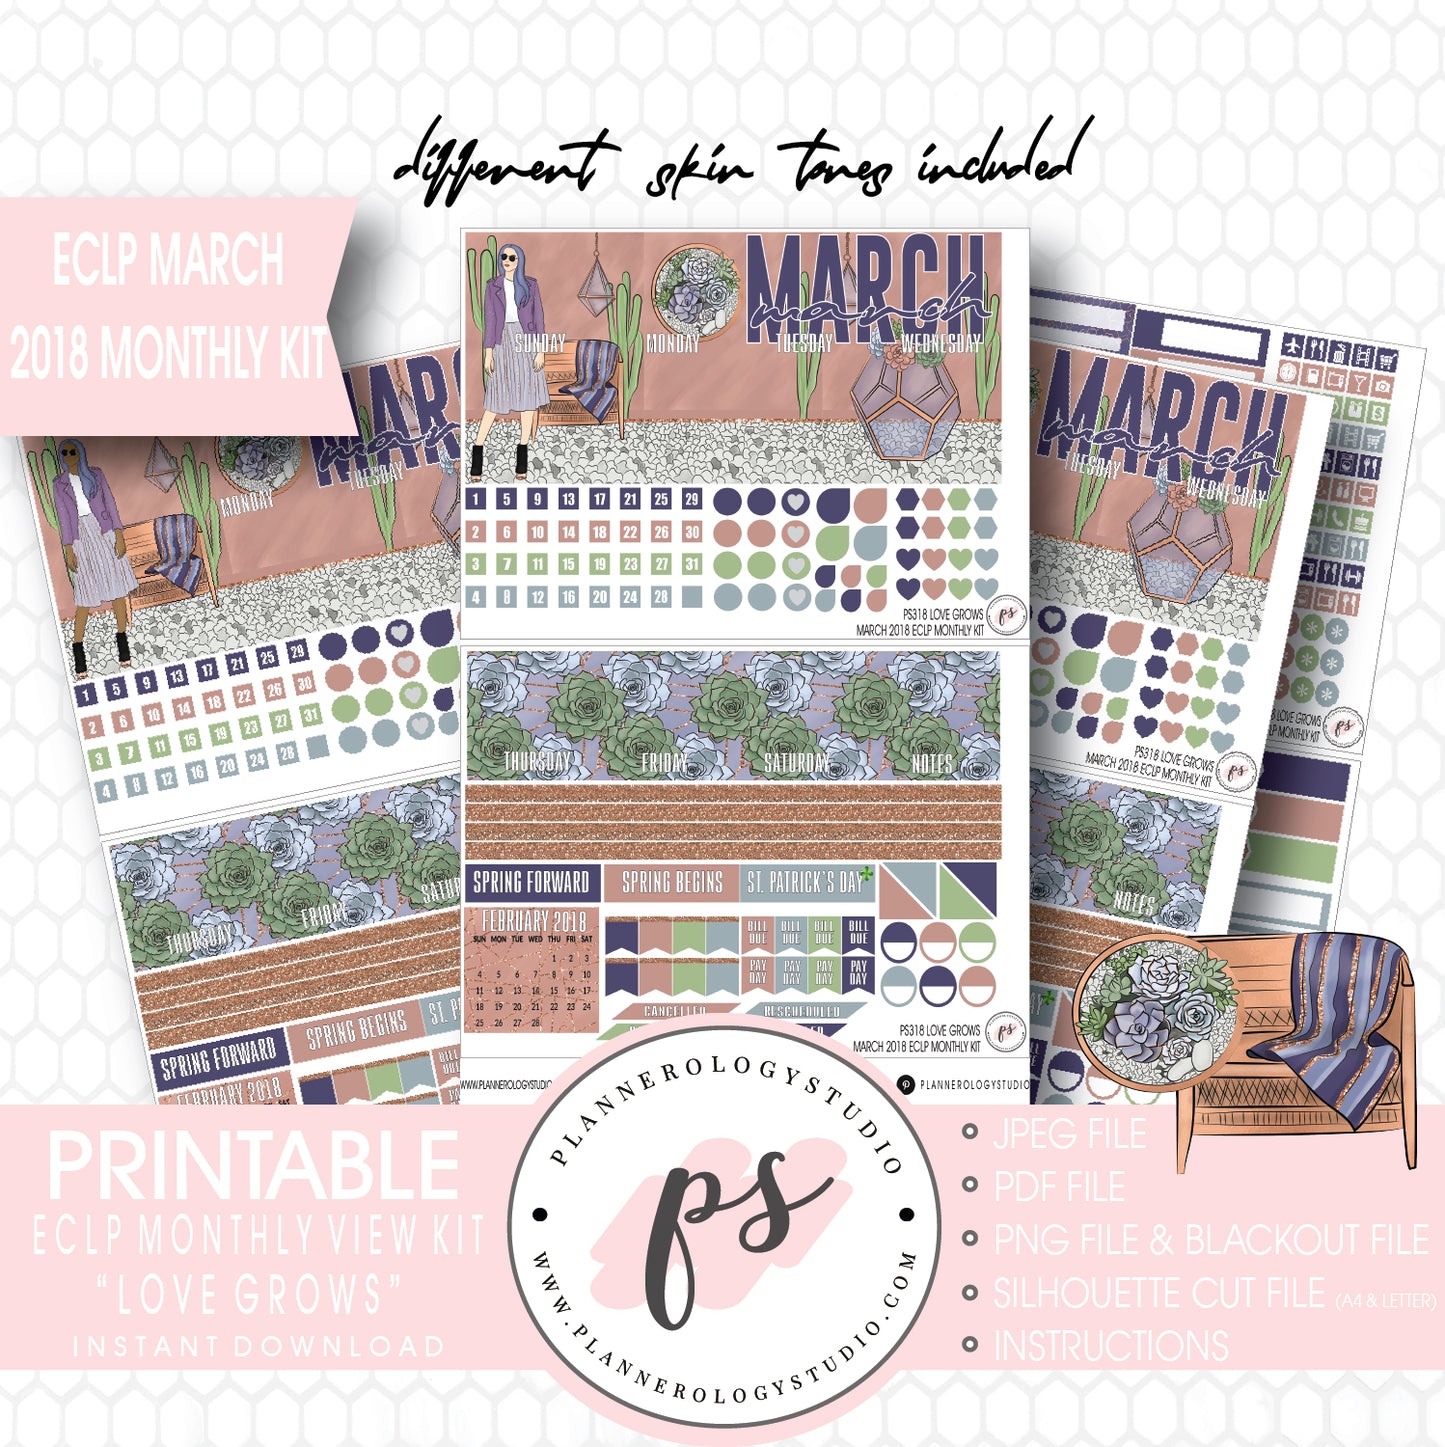 Love Grows March 2018 Monthly View Kit Digital Printable Planner Stickers (for use with ECLP) - Plannerologystudio